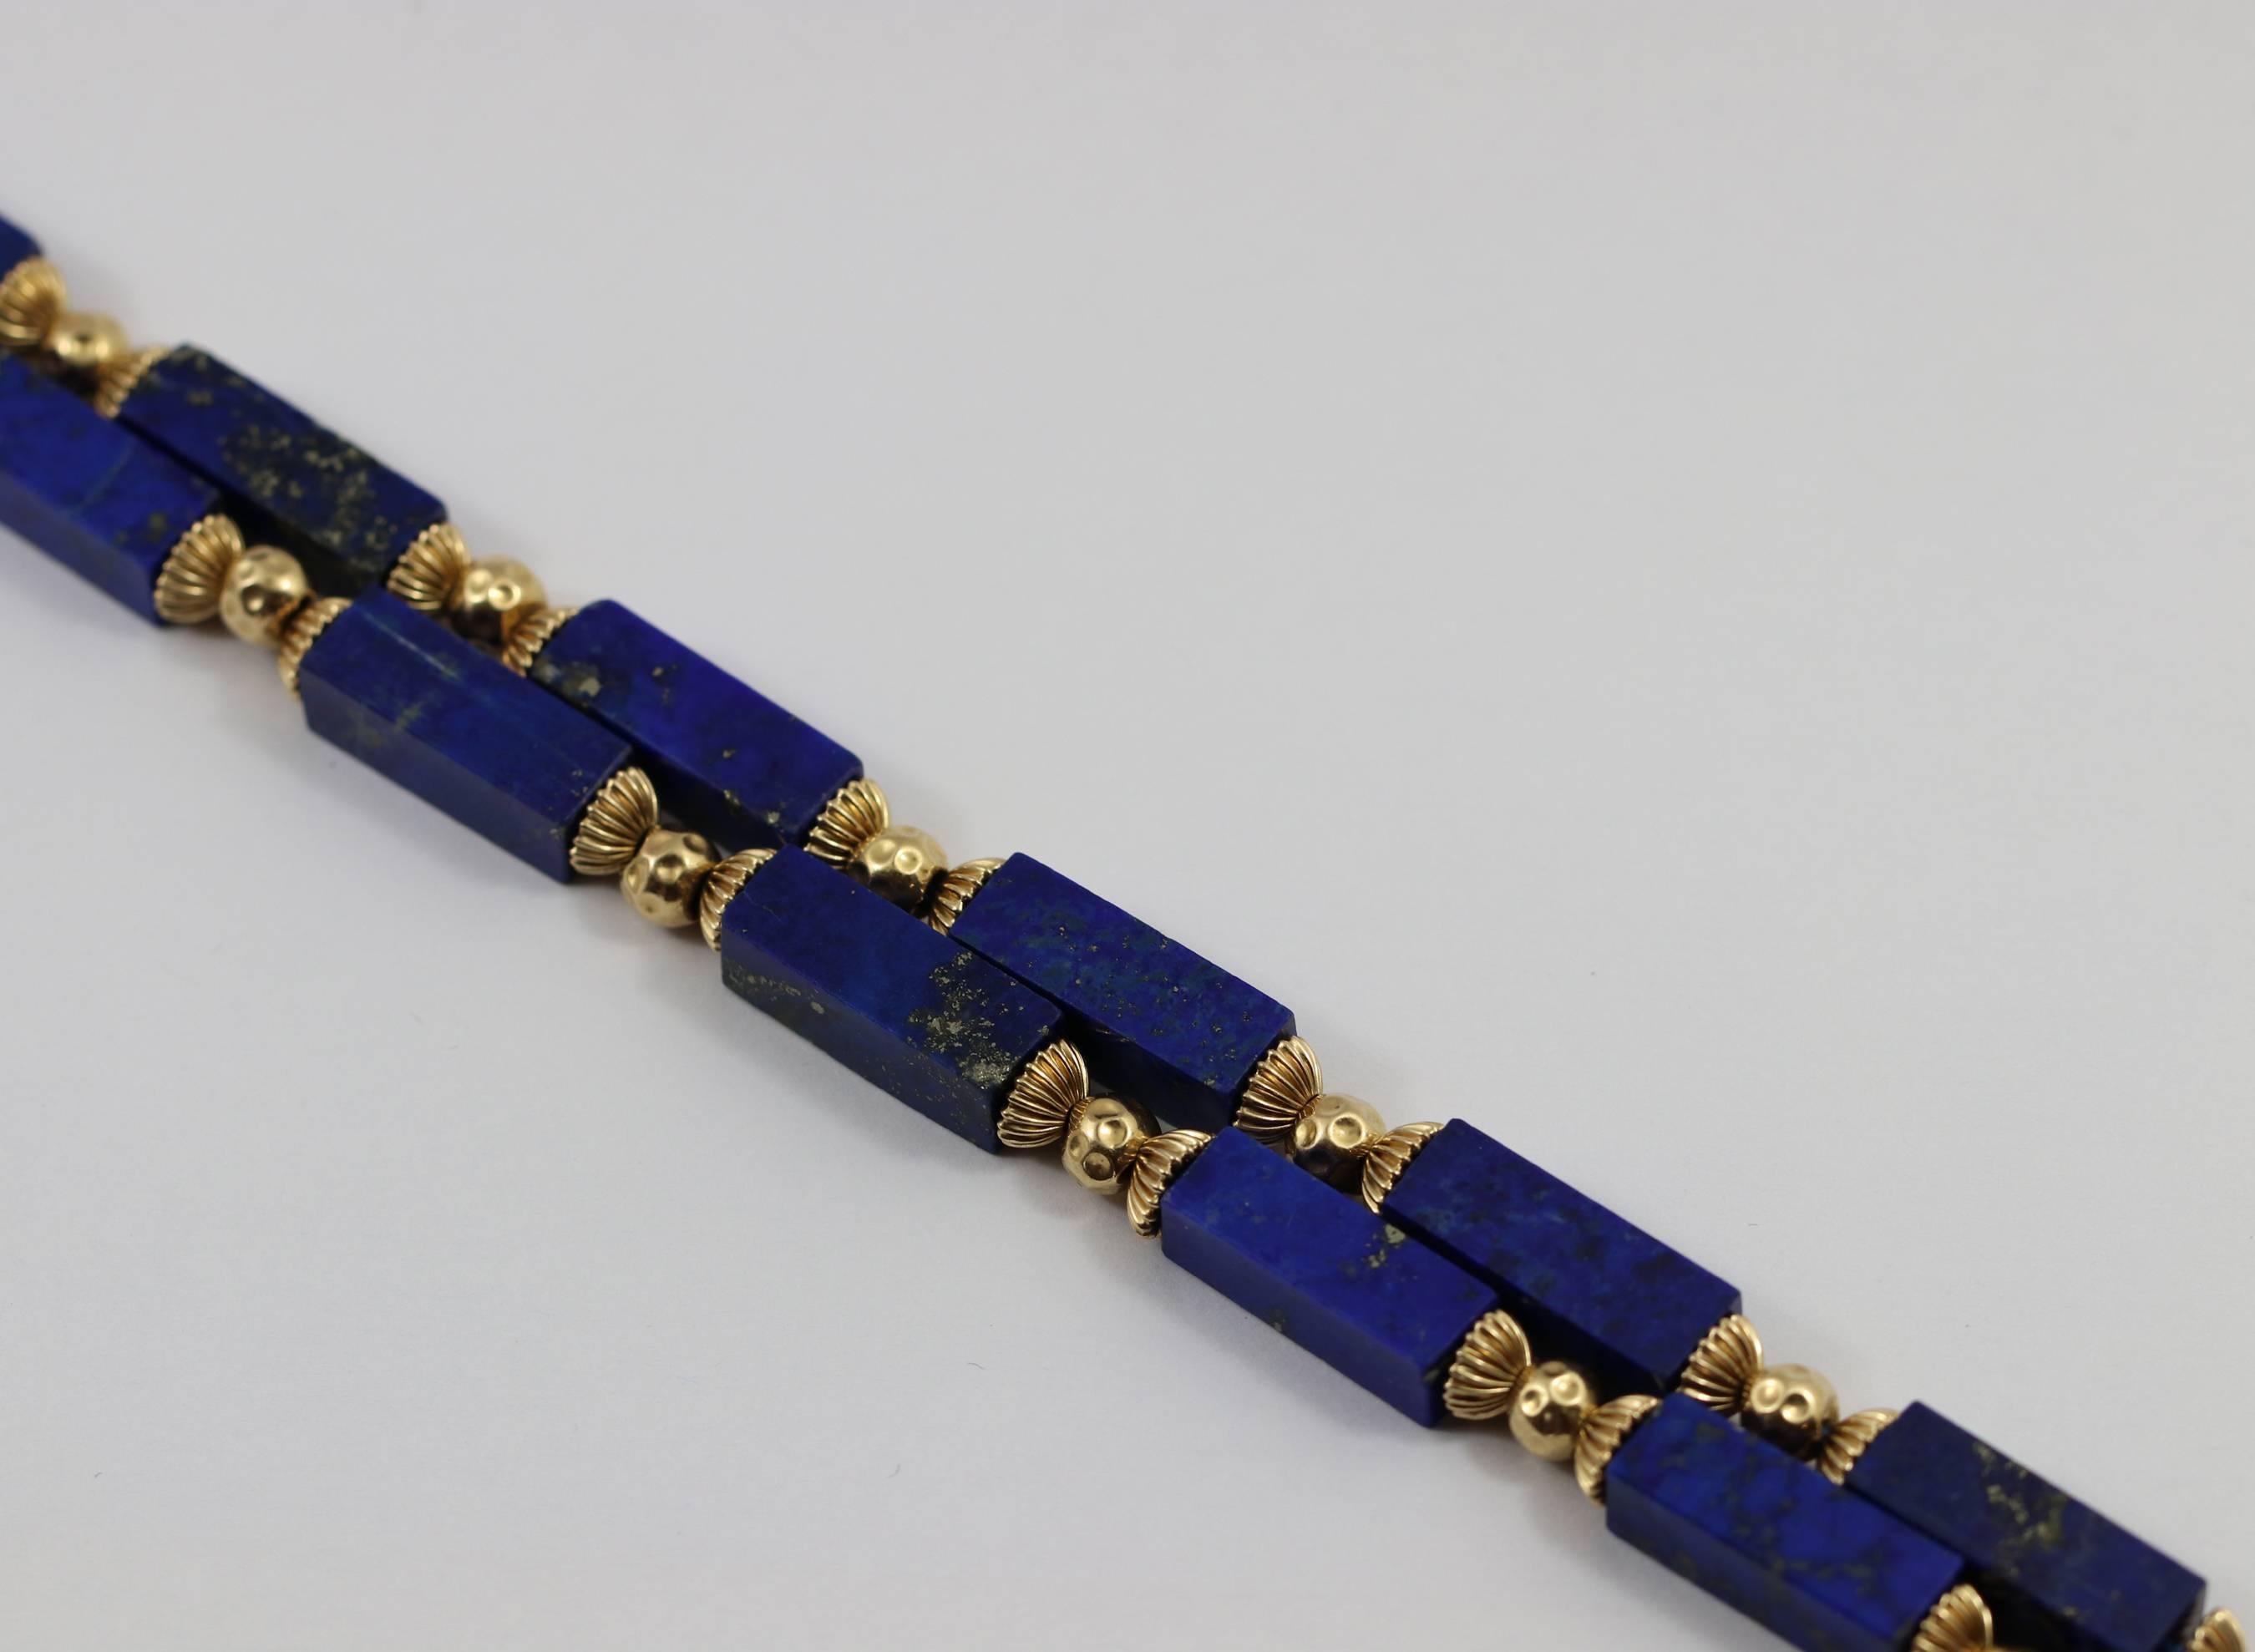 One ladies necklace comprised of 23 rectangular lapis lazuli beads, capped on either end by fluted gold caps, with dimpled gold beads in between. Each piece of lapis measures approximately 20mm X 6mm.